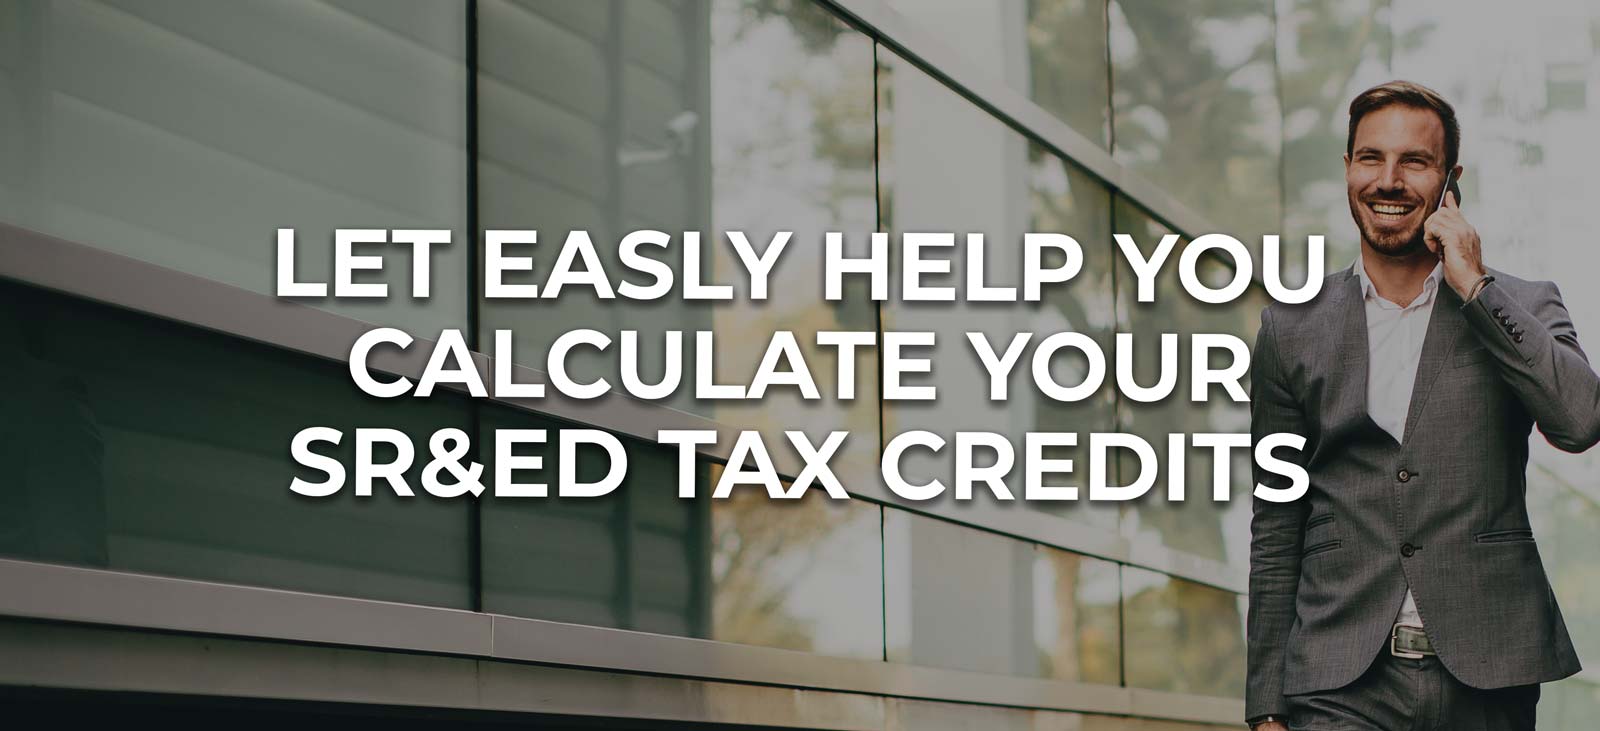 Let Easly help you calculate your SR&ED tax credits